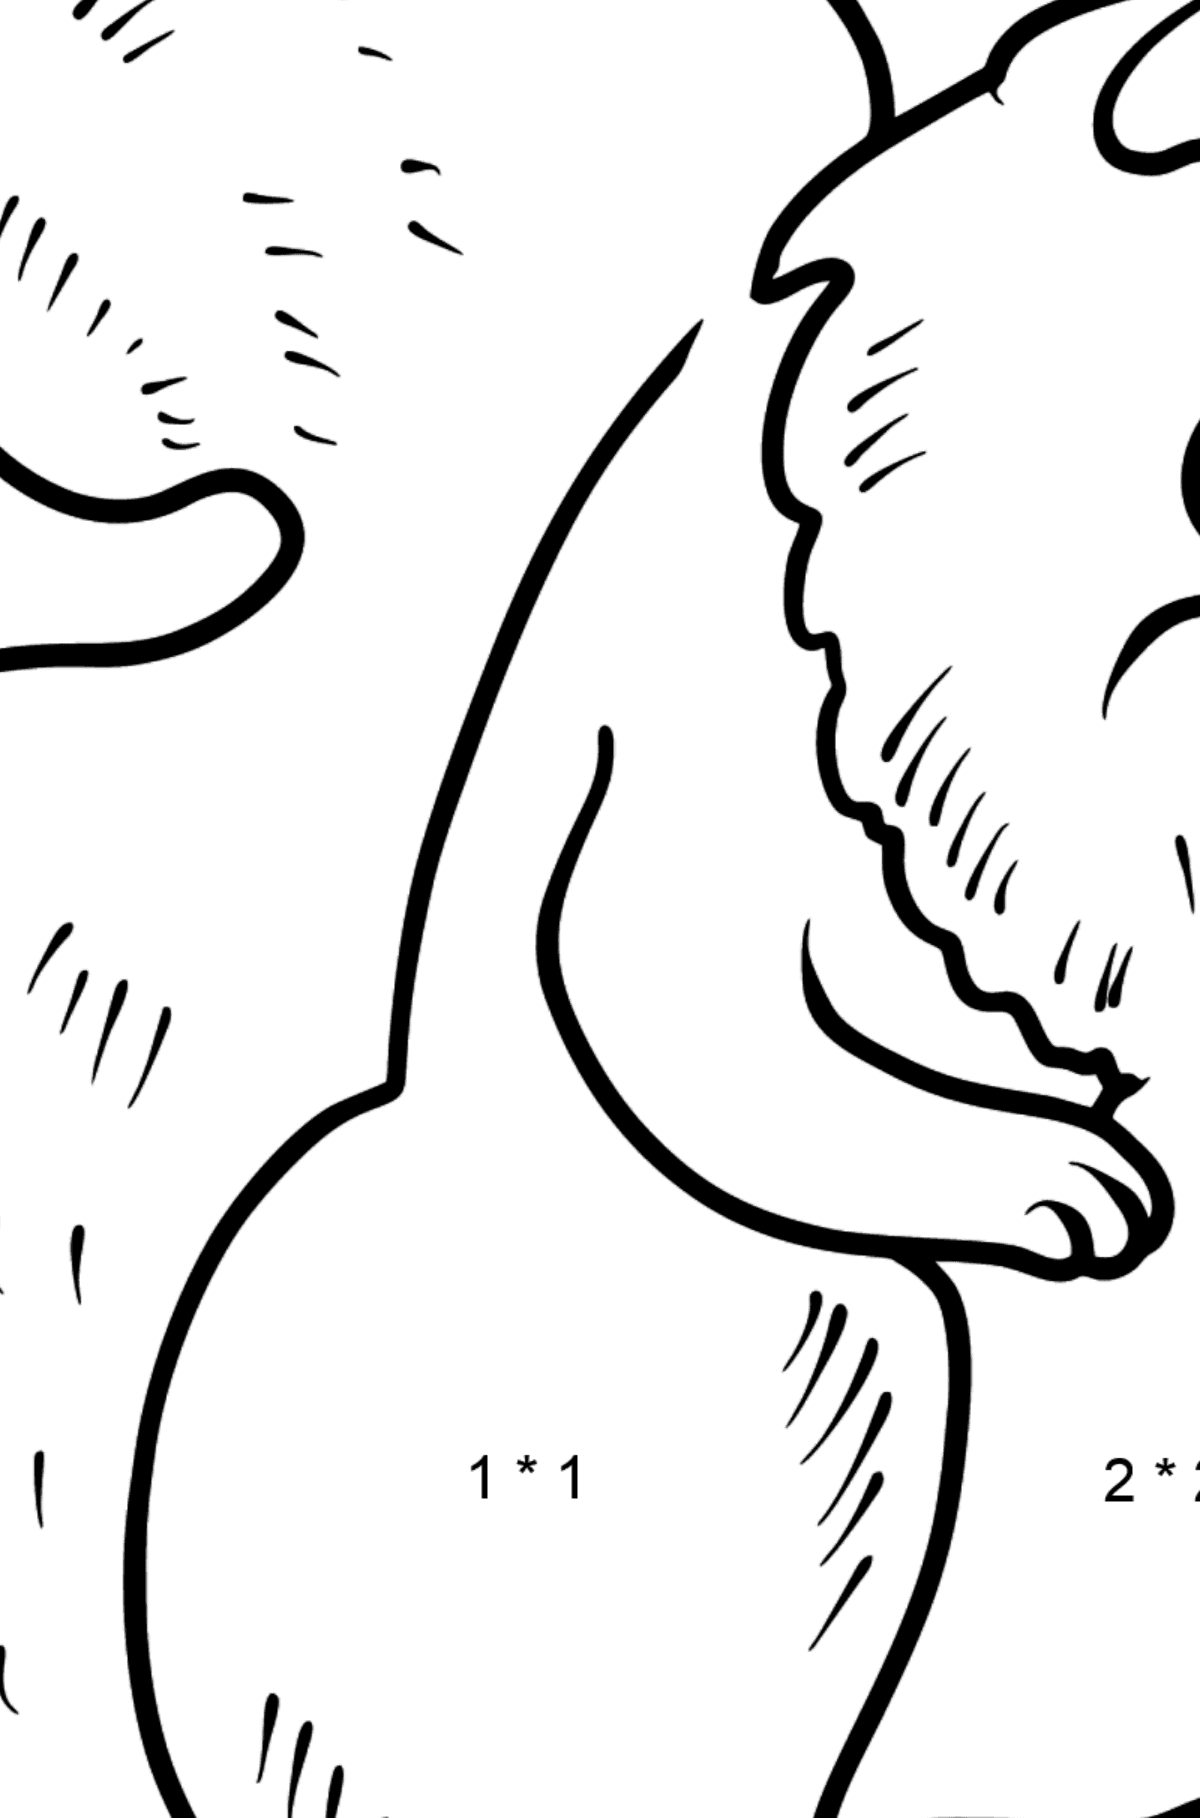 Squirrel coloring page - Math Coloring - Multiplication for Kids